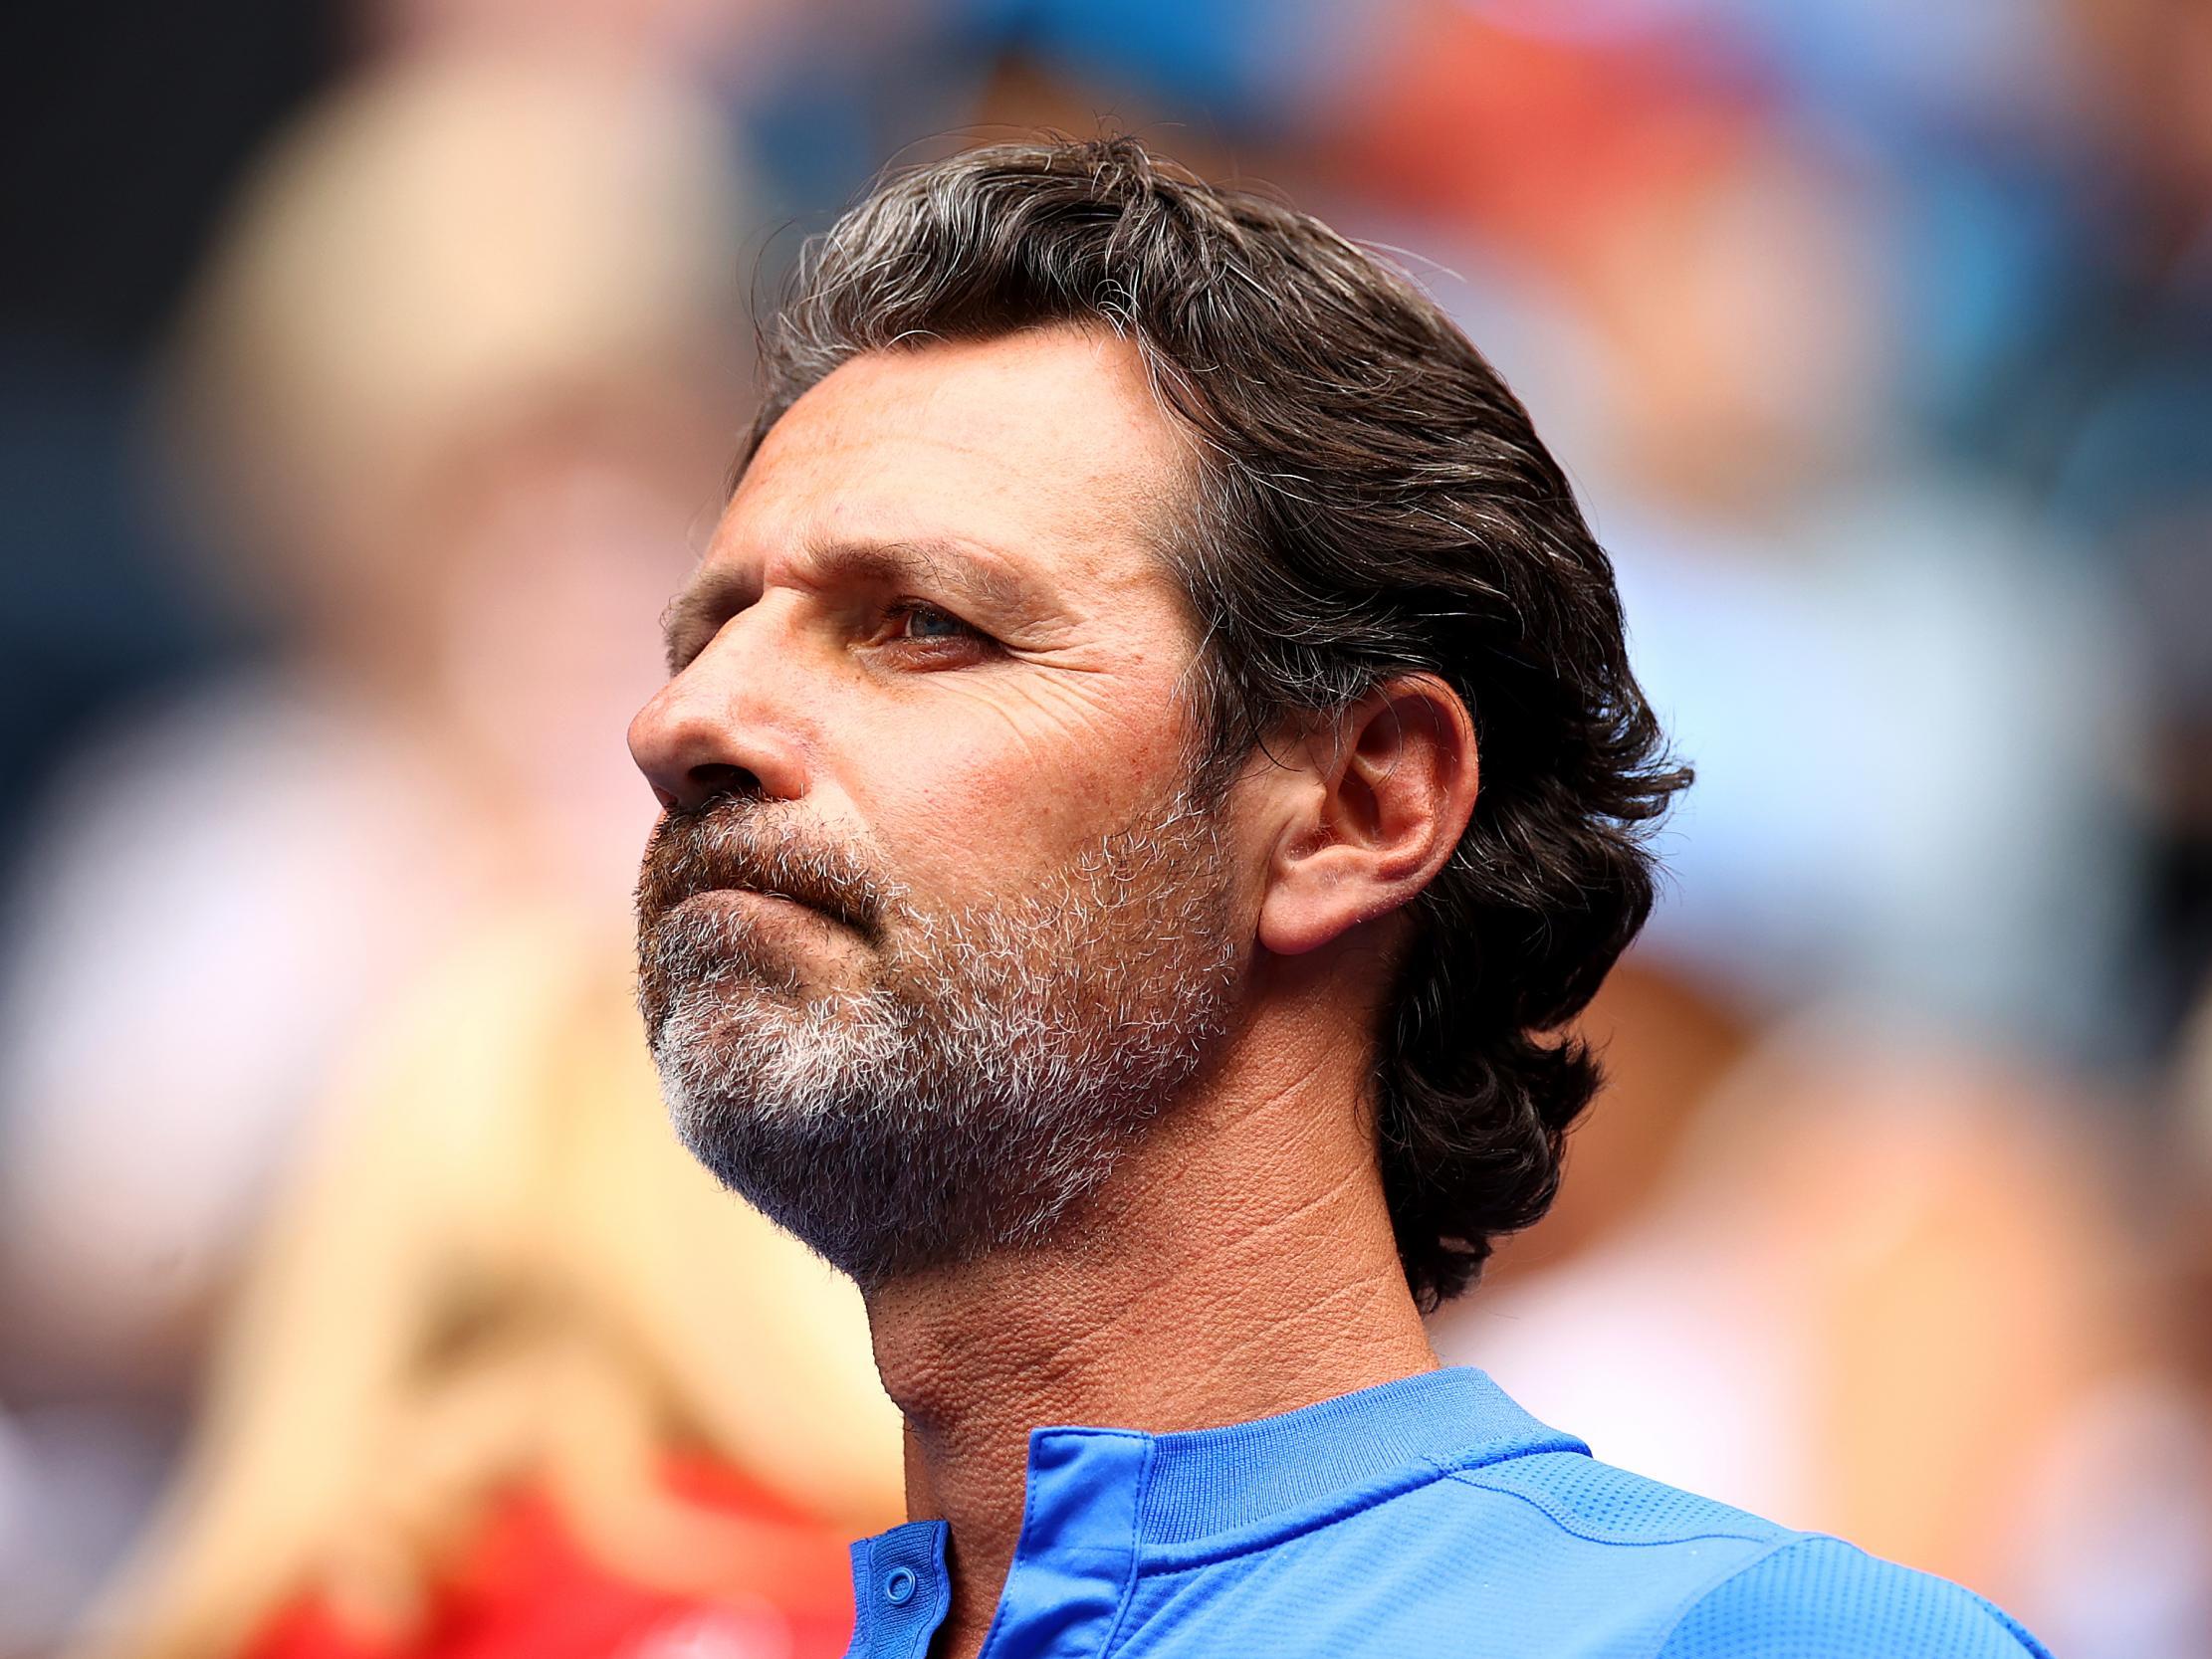 Patrick Mouratoglou hopes Ultimate Tennis Showdown can add a new dimension to the sport